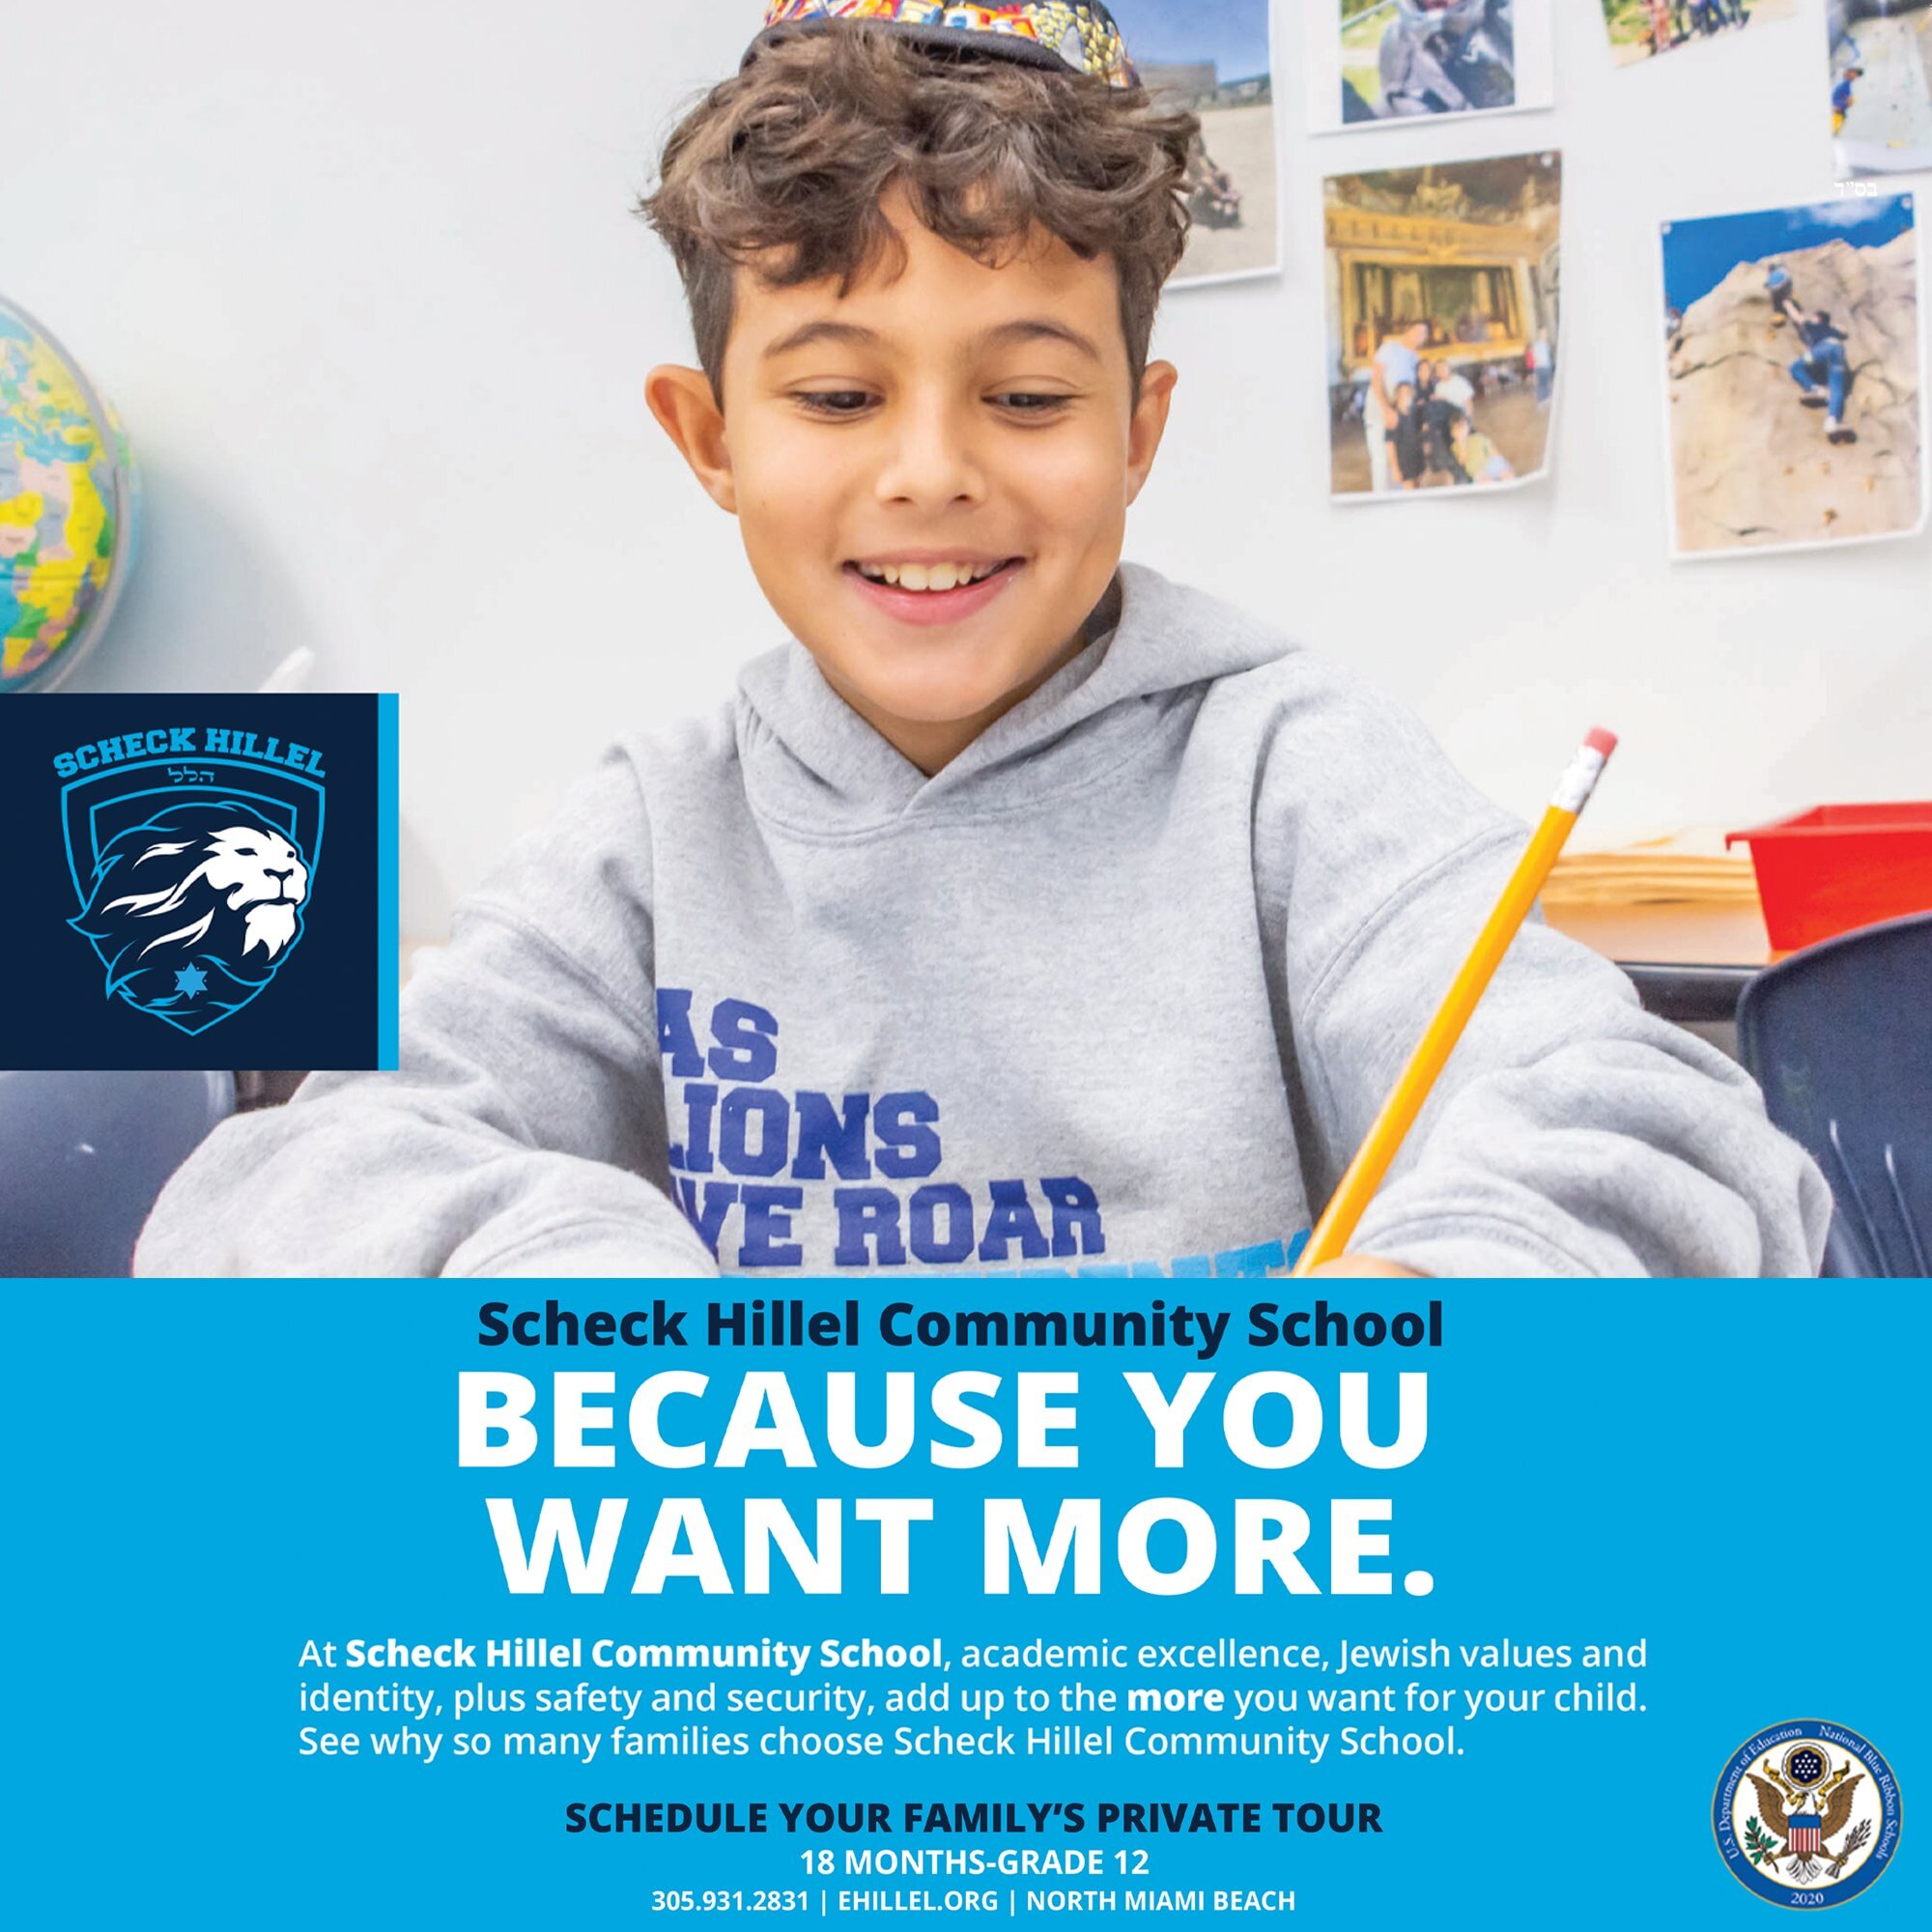 Scheck Hillel's commitment to education, faith, family, and community is inspiring. As a two-time distinguished Blue Ribbon School of Excellence, they are designing Jewish education for a new generation. Learn more about scheduling your family&rsquo;